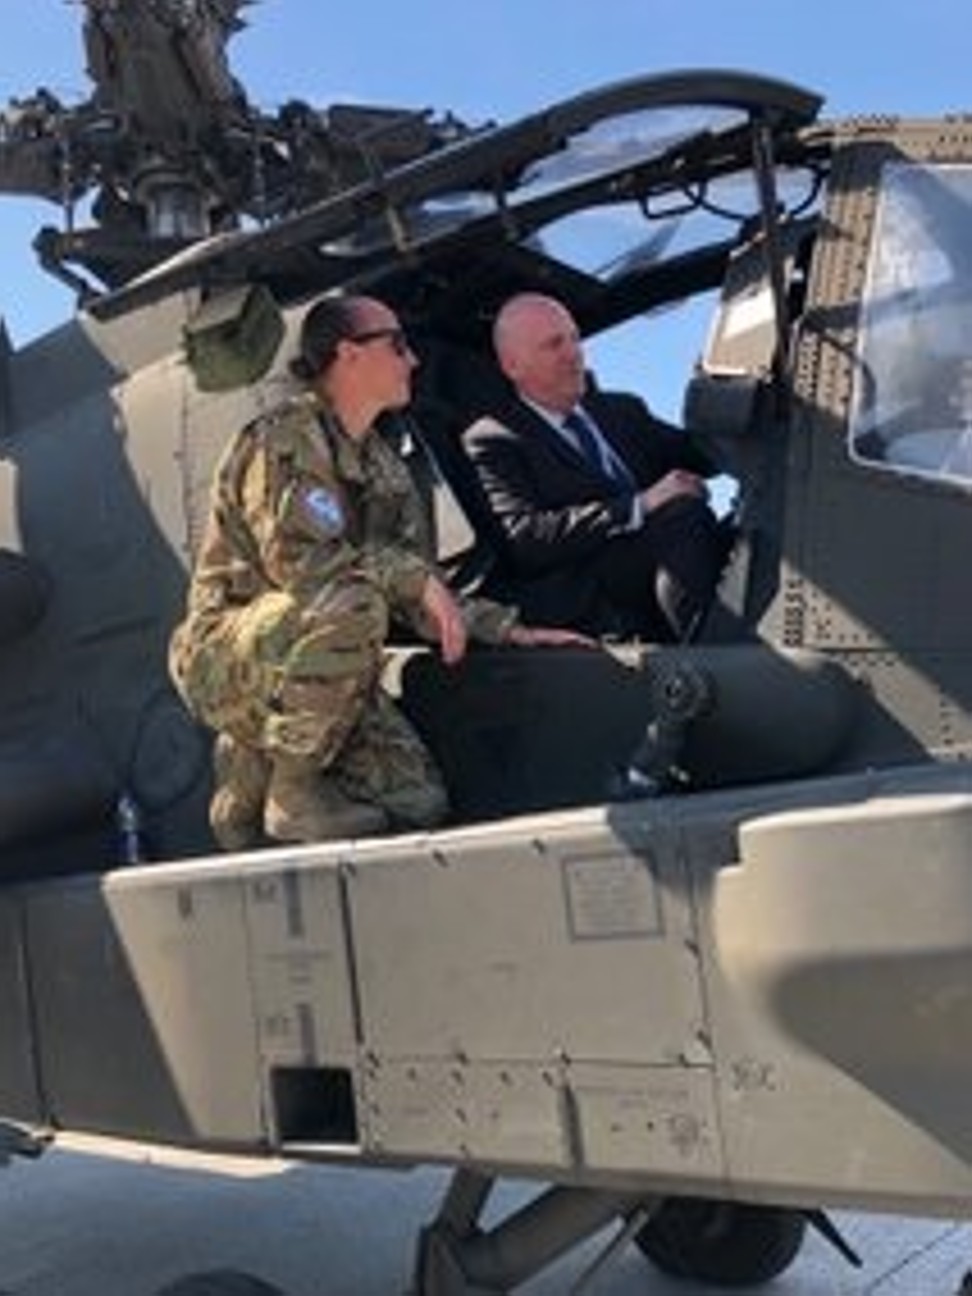 Cooper aboard a US attack helicopter. Photo: US Department of State